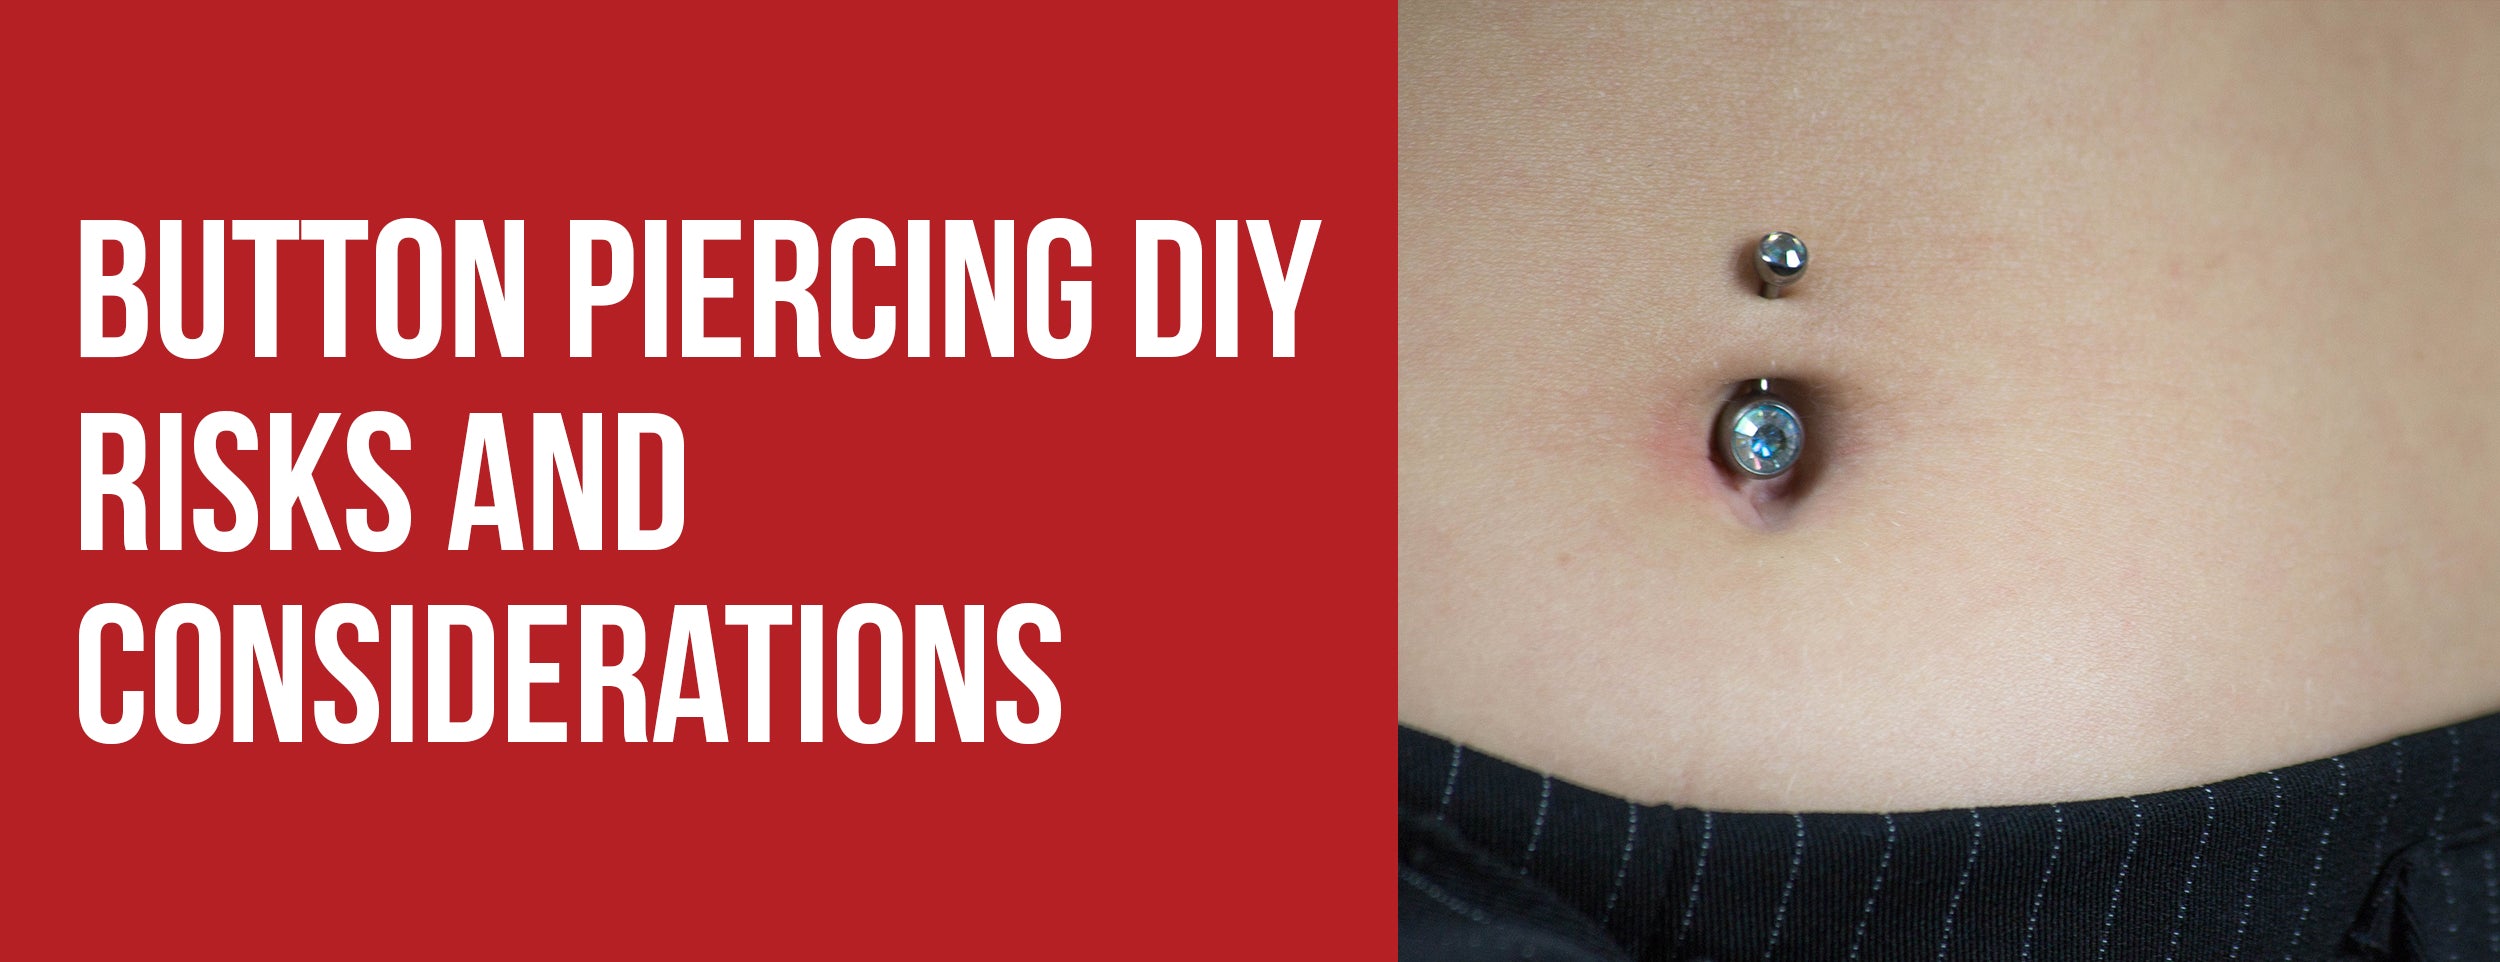 The risks and considerations of DIY button piercing